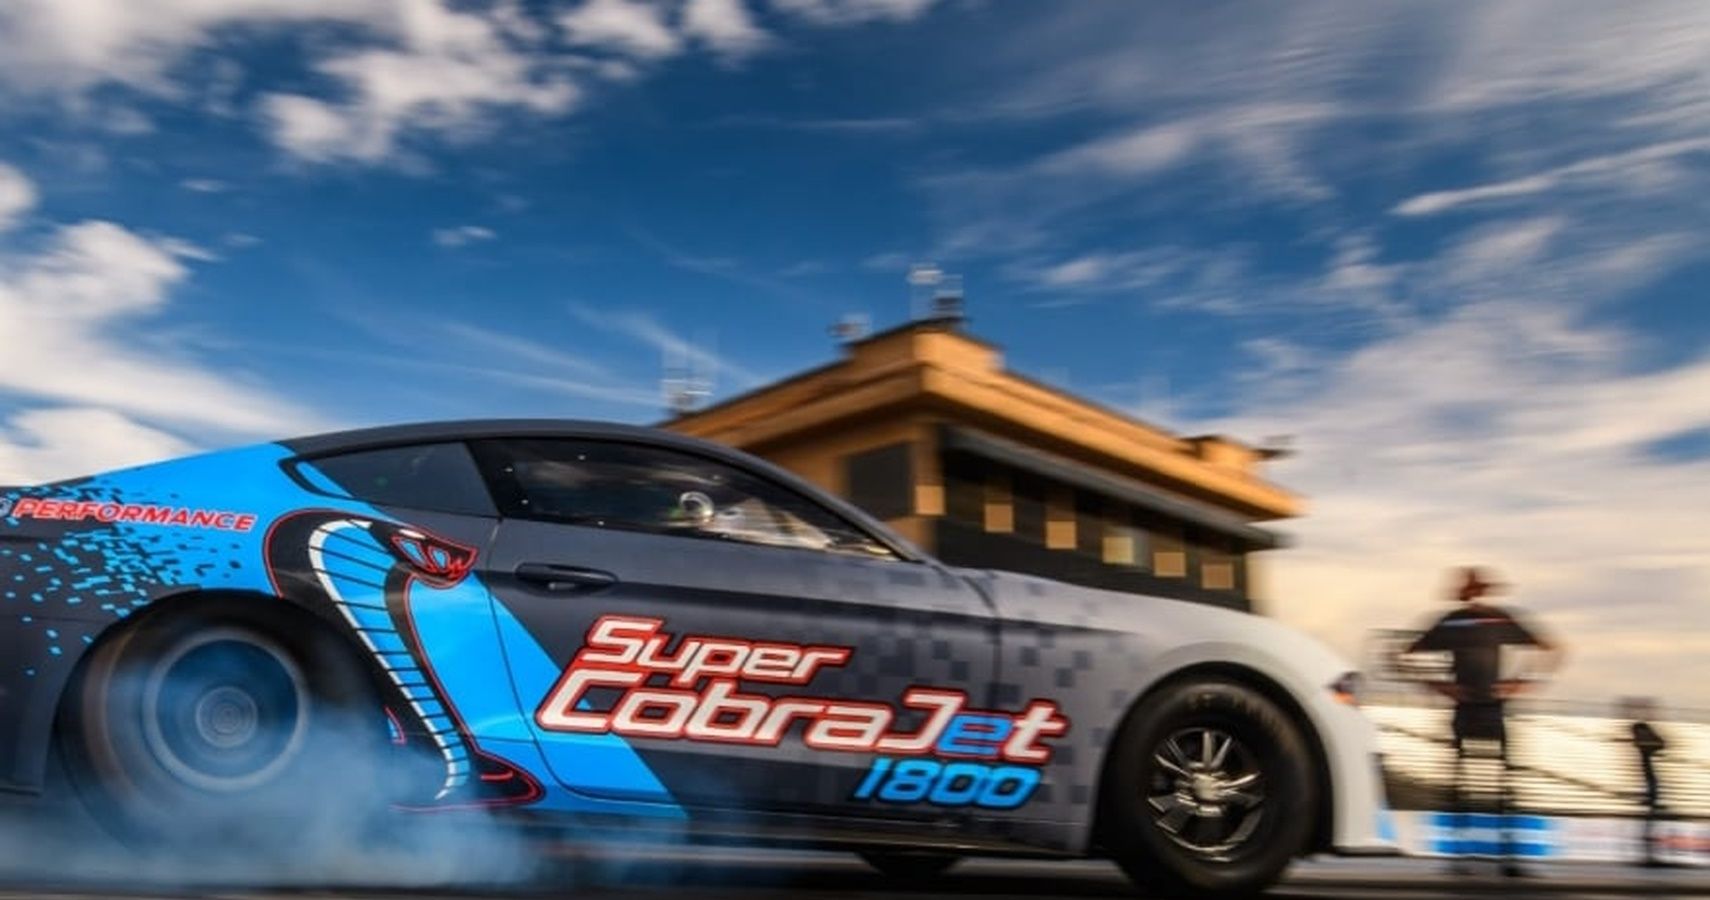 The Ford Mustang Super Cobra Jet 1800 on a dragstrip